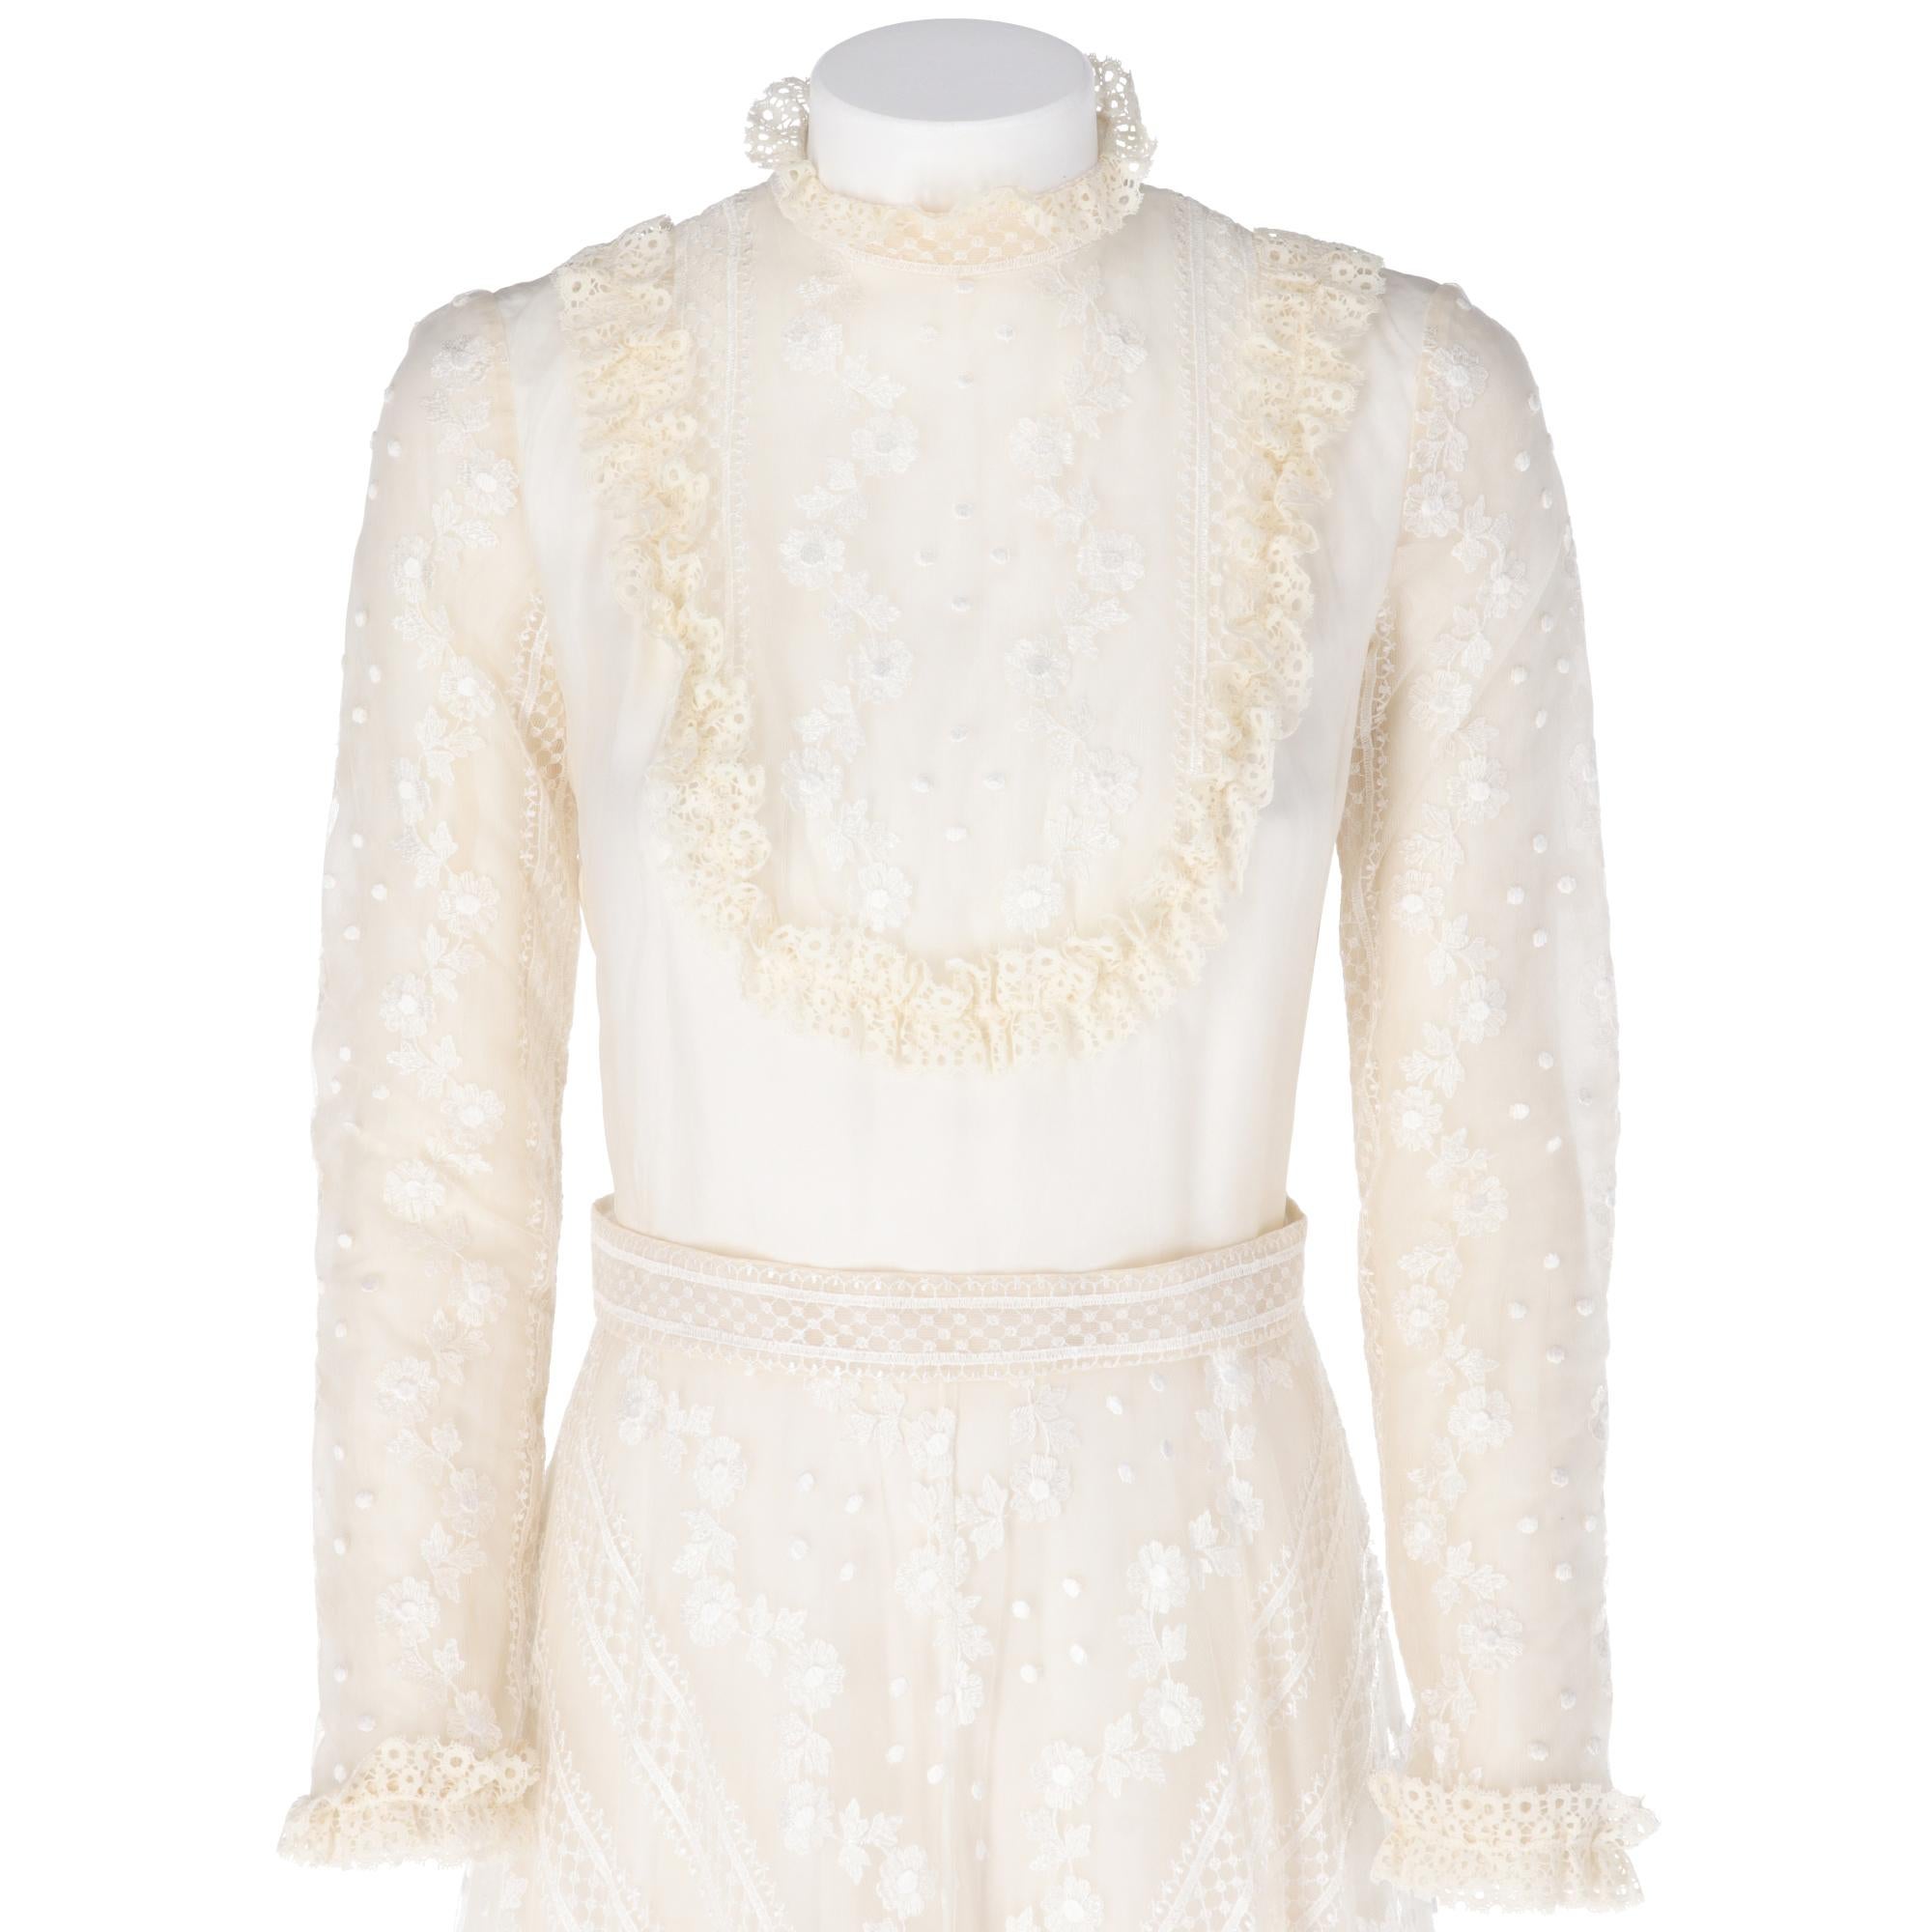 1970s Ivory Embroidered Wedding Dress 6